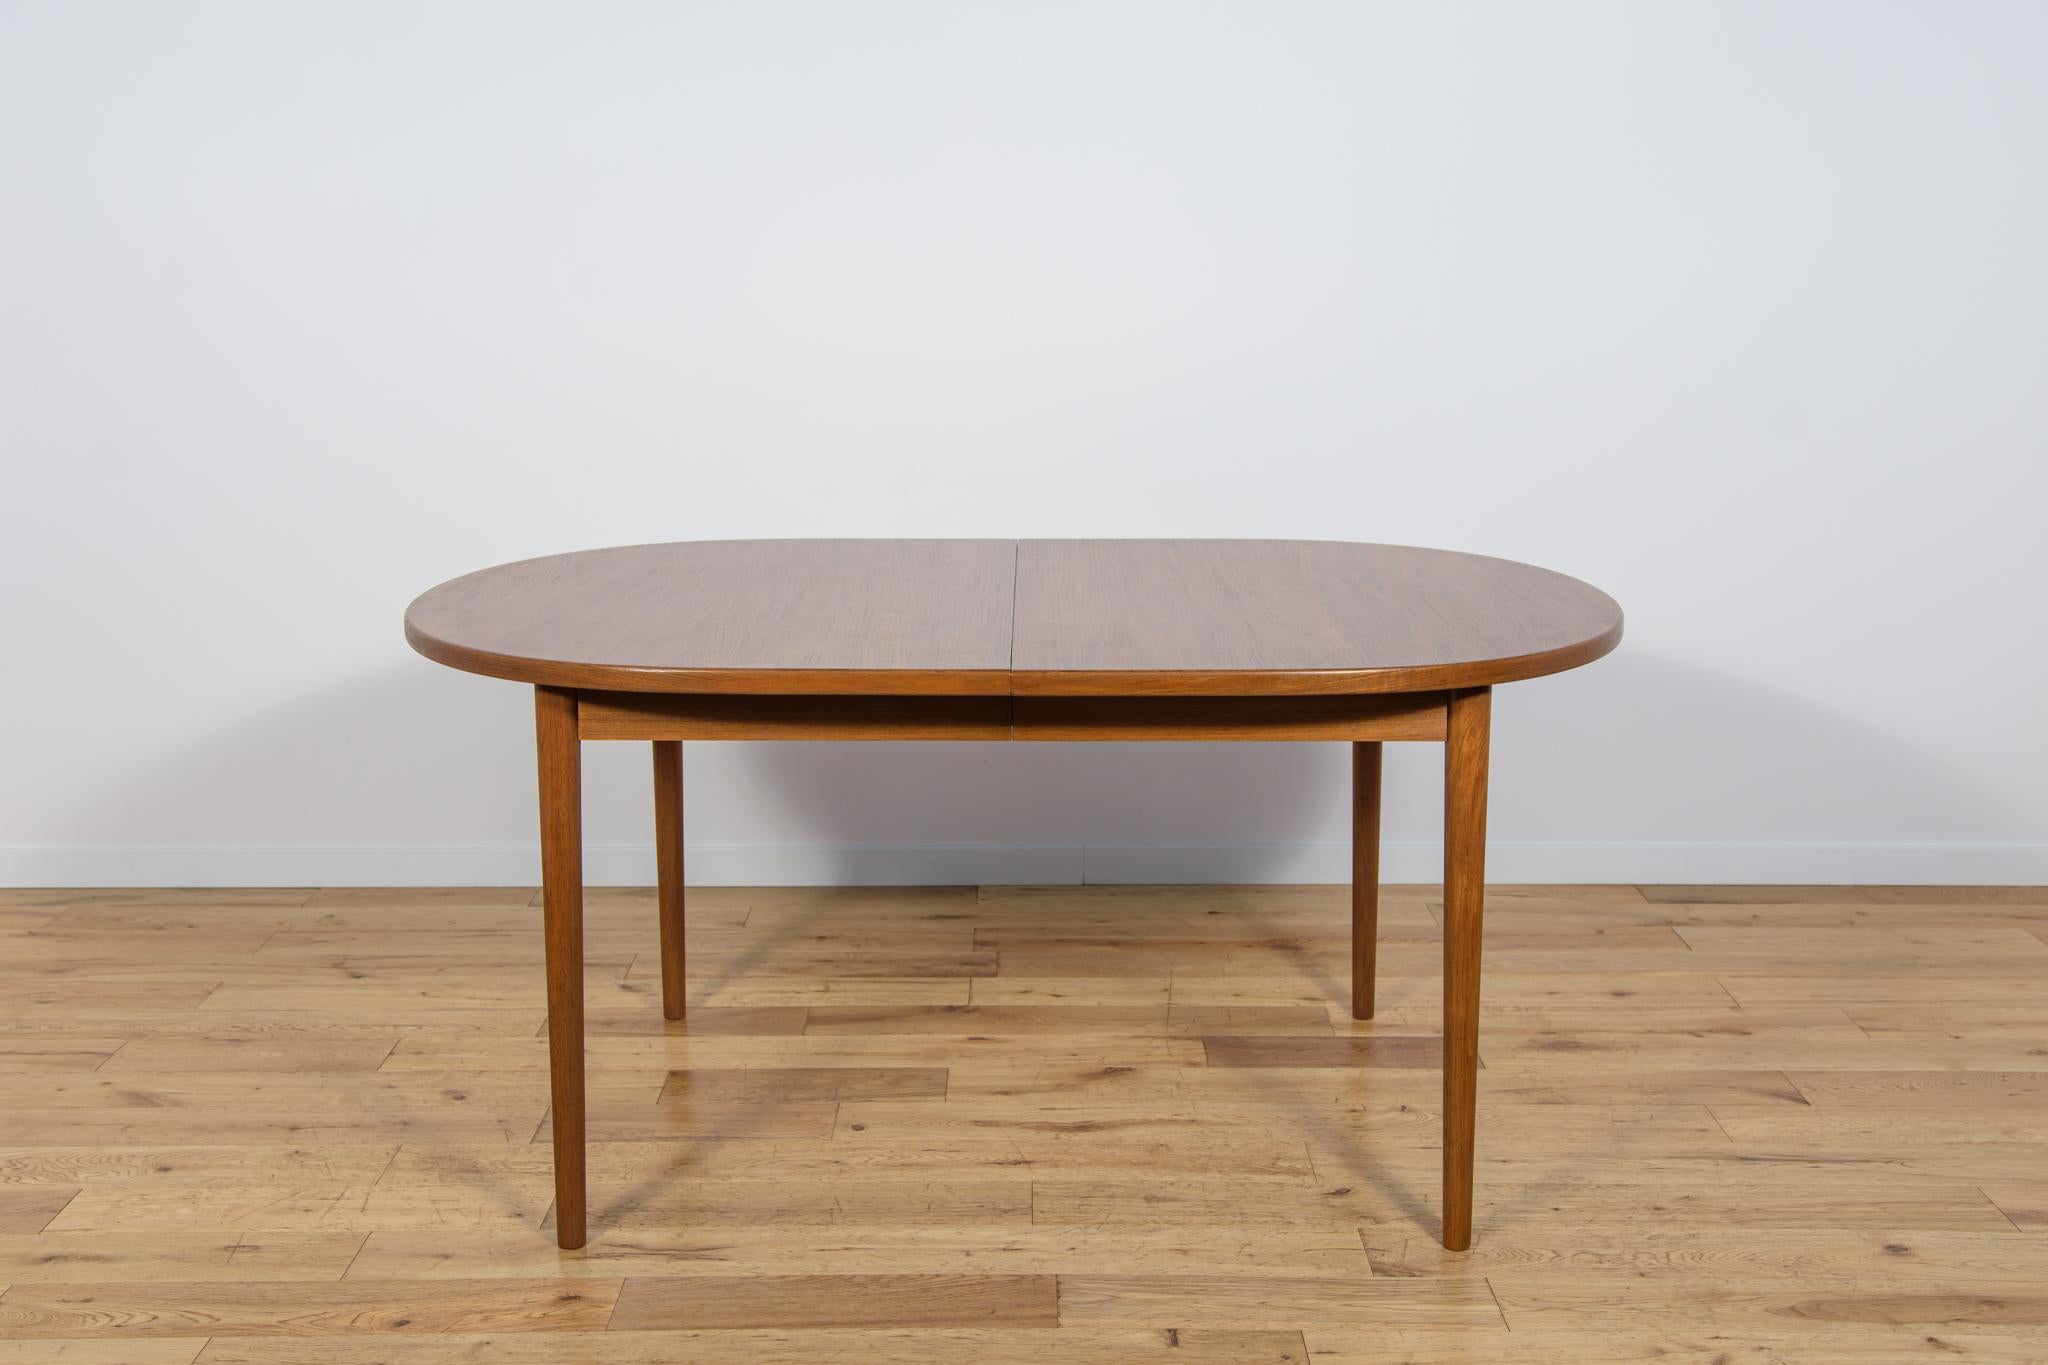 The large extendable teak table was designed in the 1960s by Nils Jonsson for the Swedish manufacturer Troeds. It has been completely renovated, cleaned of old surfaces, painted with oak stain, and finished with a strong semi-matt varnish. The table